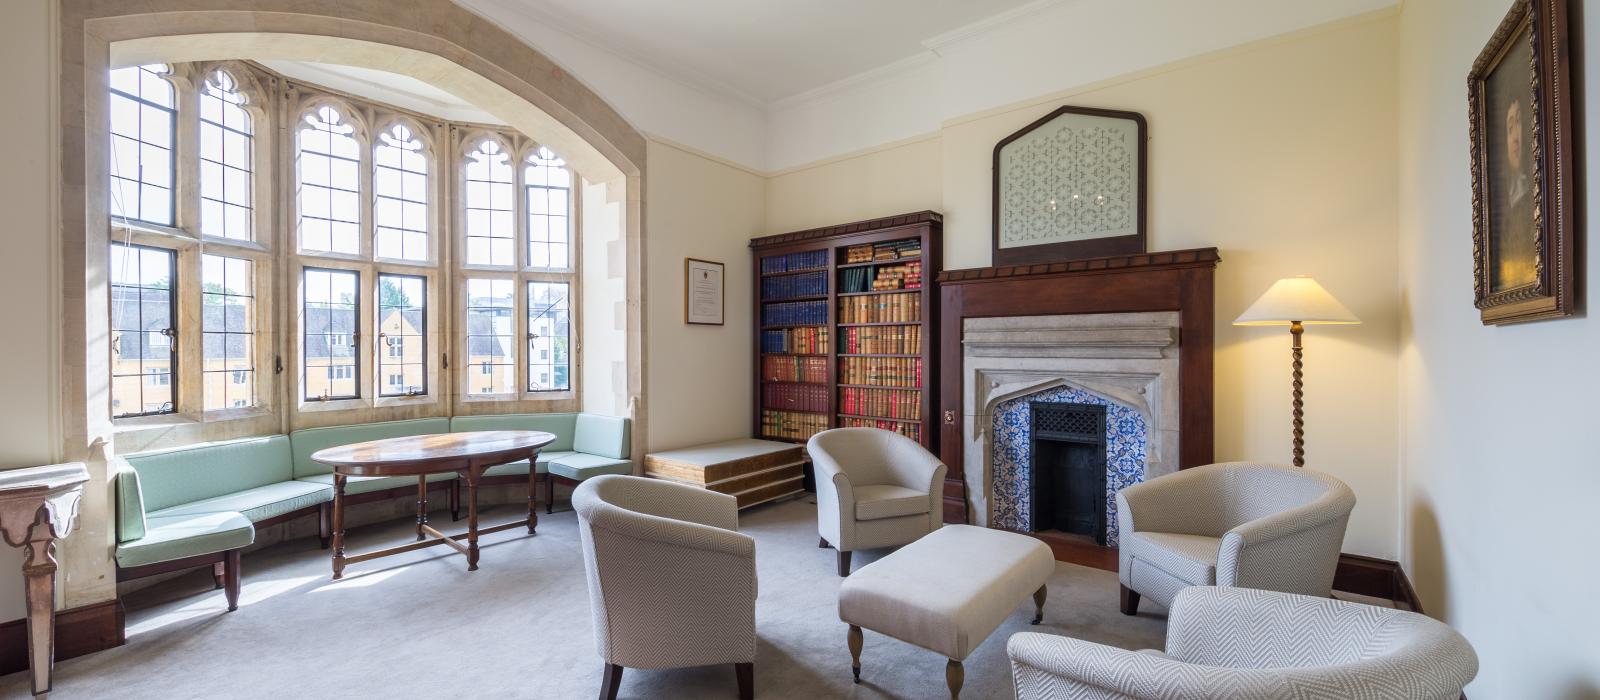 Tower Room, Mansfield College